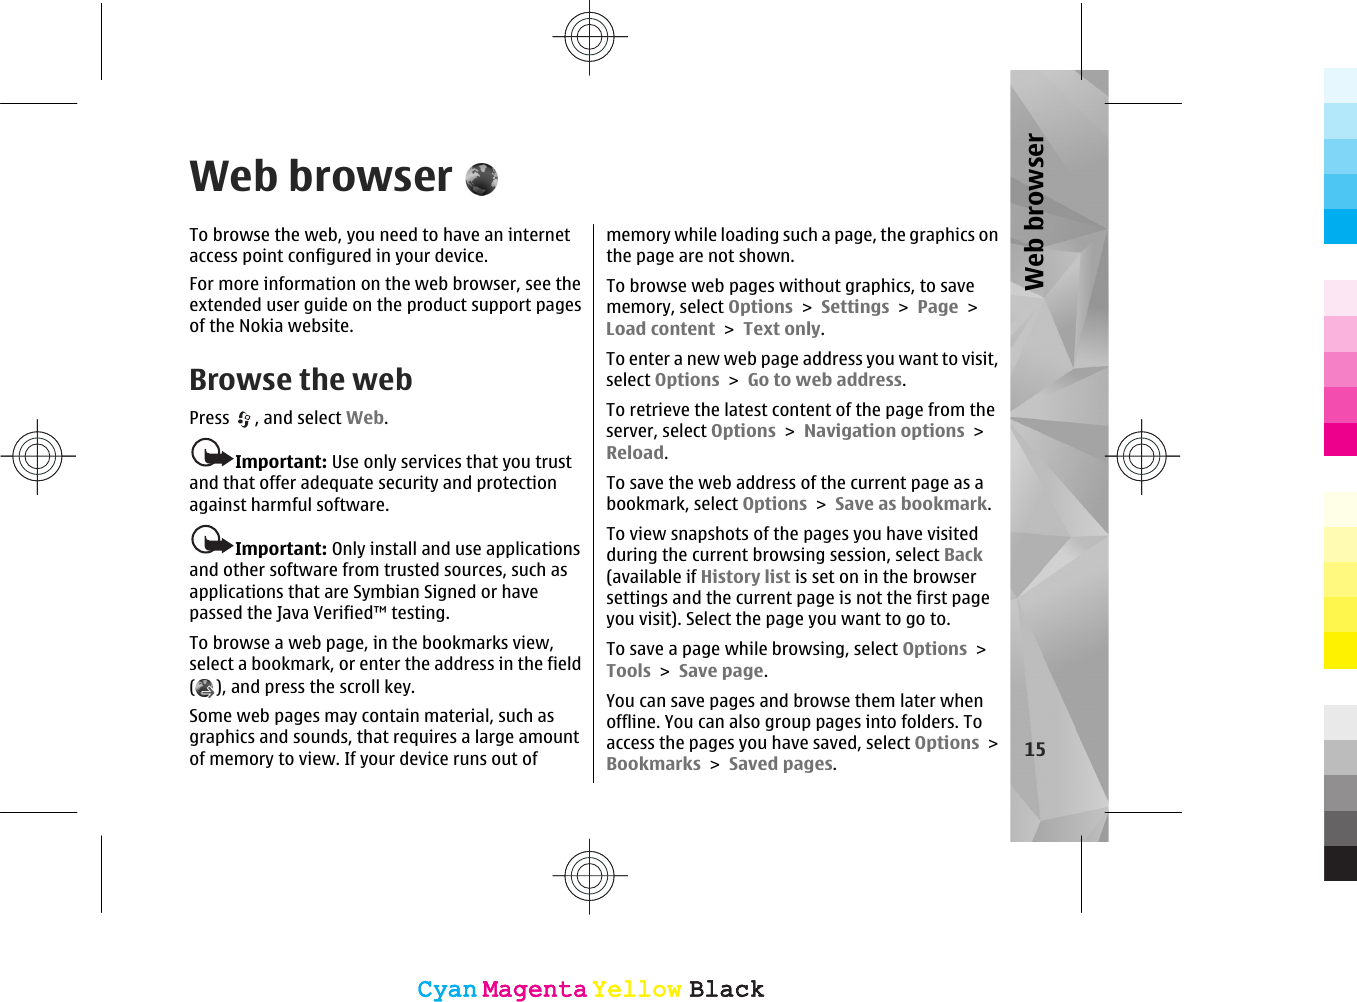 Web browserTo browse the web, you need to have an internetaccess point configured in your device.For more information on the web browser, see theextended user guide on the product support pagesof the Nokia website.Browse the webPress  , and select Web.Important: Use only services that you trustand that offer adequate security and protectionagainst harmful software.Important: Only install and use applicationsand other software from trusted sources, such asapplications that are Symbian Signed or havepassed the Java Verified™ testing.To browse a web page, in the bookmarks view,select a bookmark, or enter the address in the field(), and press the scroll key.Some web pages may contain material, such asgraphics and sounds, that requires a large amountof memory to view. If your device runs out ofmemory while loading such a page, the graphics onthe page are not shown.To browse web pages without graphics, to savememory, select Options &gt; Settings &gt; Page &gt;Load content &gt; Text only.To enter a new web page address you want to visit,select Options &gt; Go to web address.To retrieve the latest content of the page from theserver, select Options &gt; Navigation options &gt;Reload.To save the web address of the current page as abookmark, select Options &gt; Save as bookmark.To view snapshots of the pages you have visitedduring the current browsing session, select Back(available if History list is set on in the browsersettings and the current page is not the first pageyou visit). Select the page you want to go to.To save a page while browsing, select Options &gt;Tools &gt; Save page.You can save pages and browse them later whenoffline. You can also group pages into folders. Toaccess the pages you have saved, select Options &gt;Bookmarks &gt; Saved pages.15Web browserCyanCyanMagentaMagentaYellowYellowBlackBlackCyanCyanMagentaMagentaYellowYellowBlackBlack